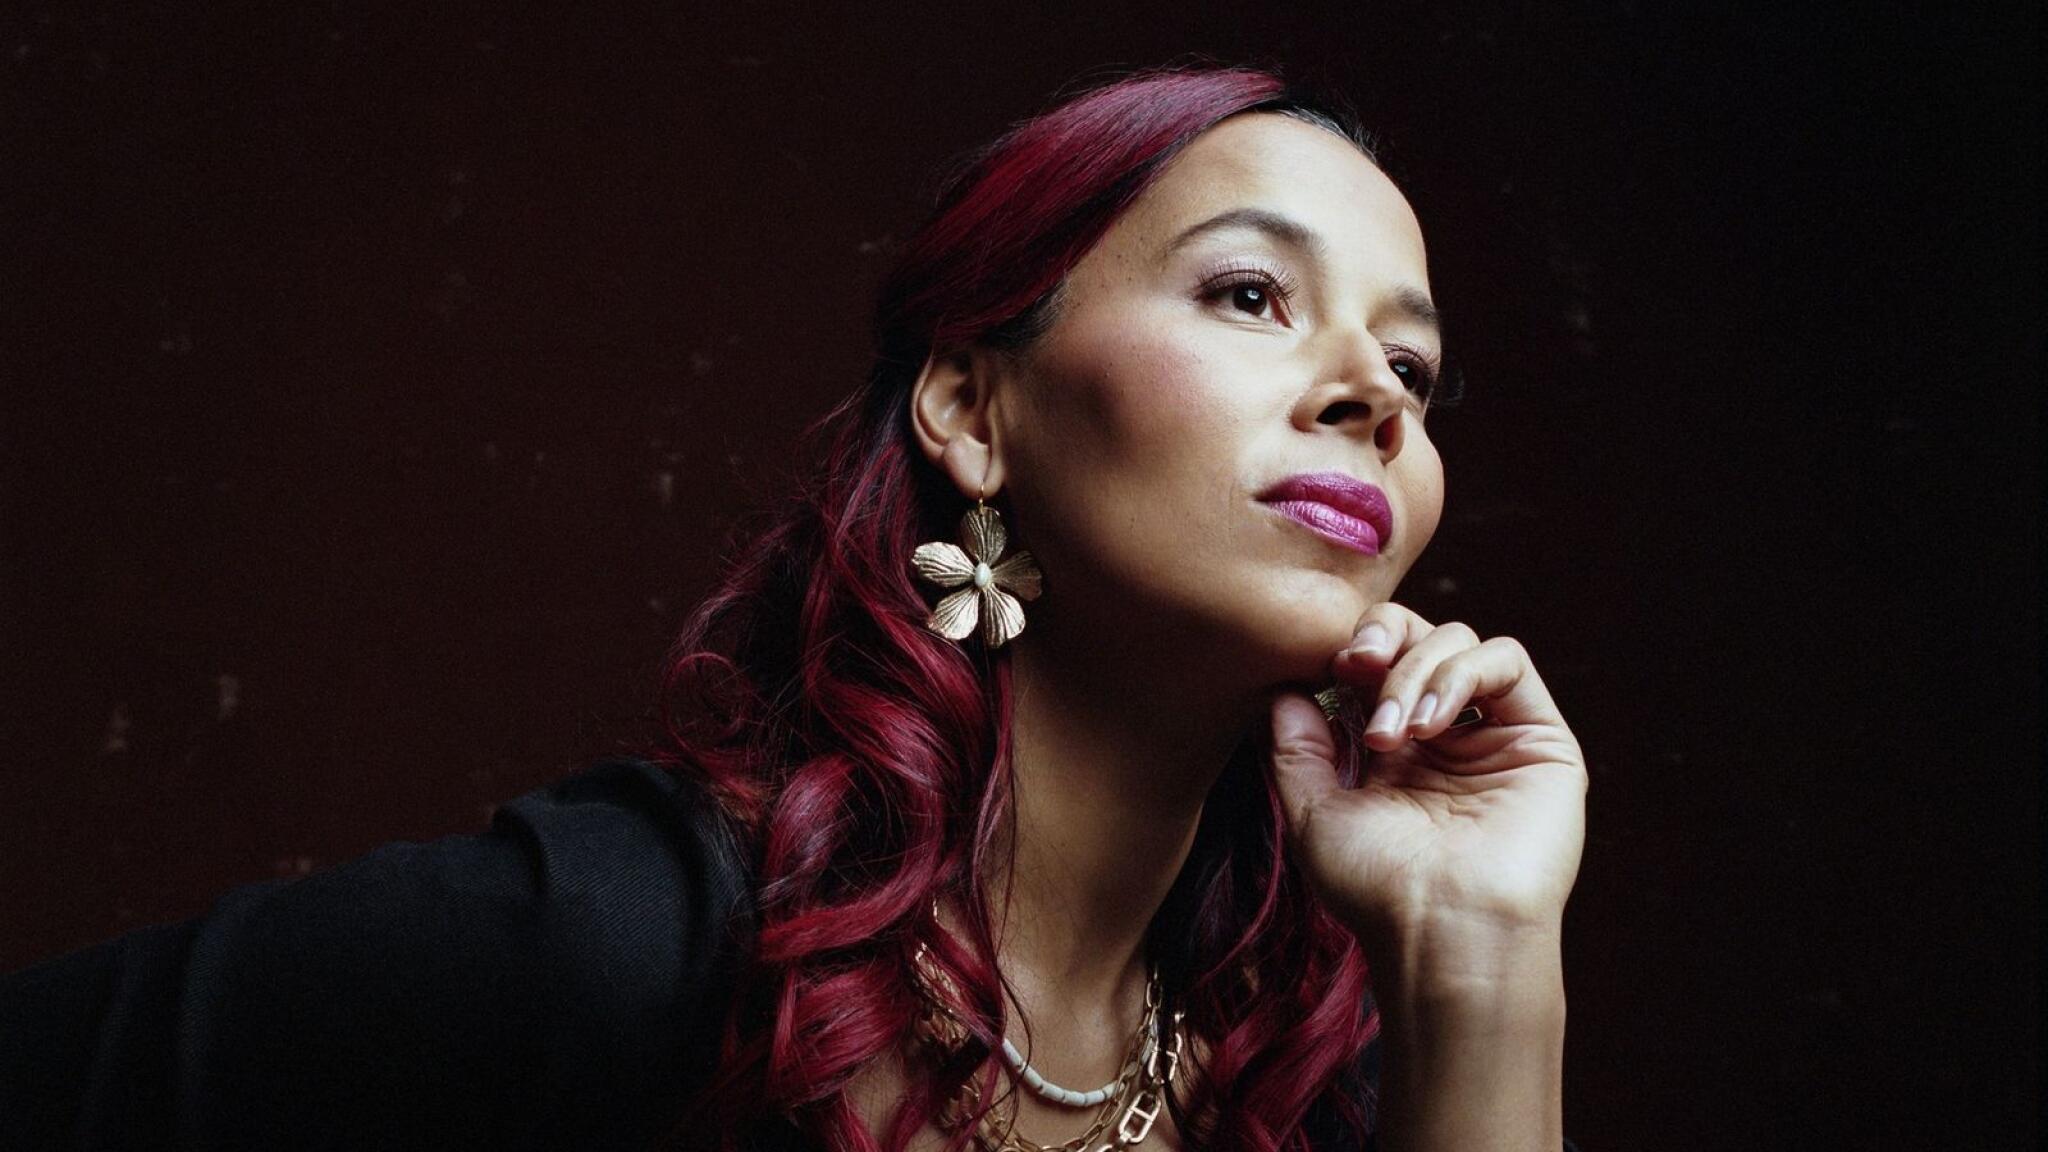 Rhiannon Giddens on her first album of original songs and winning